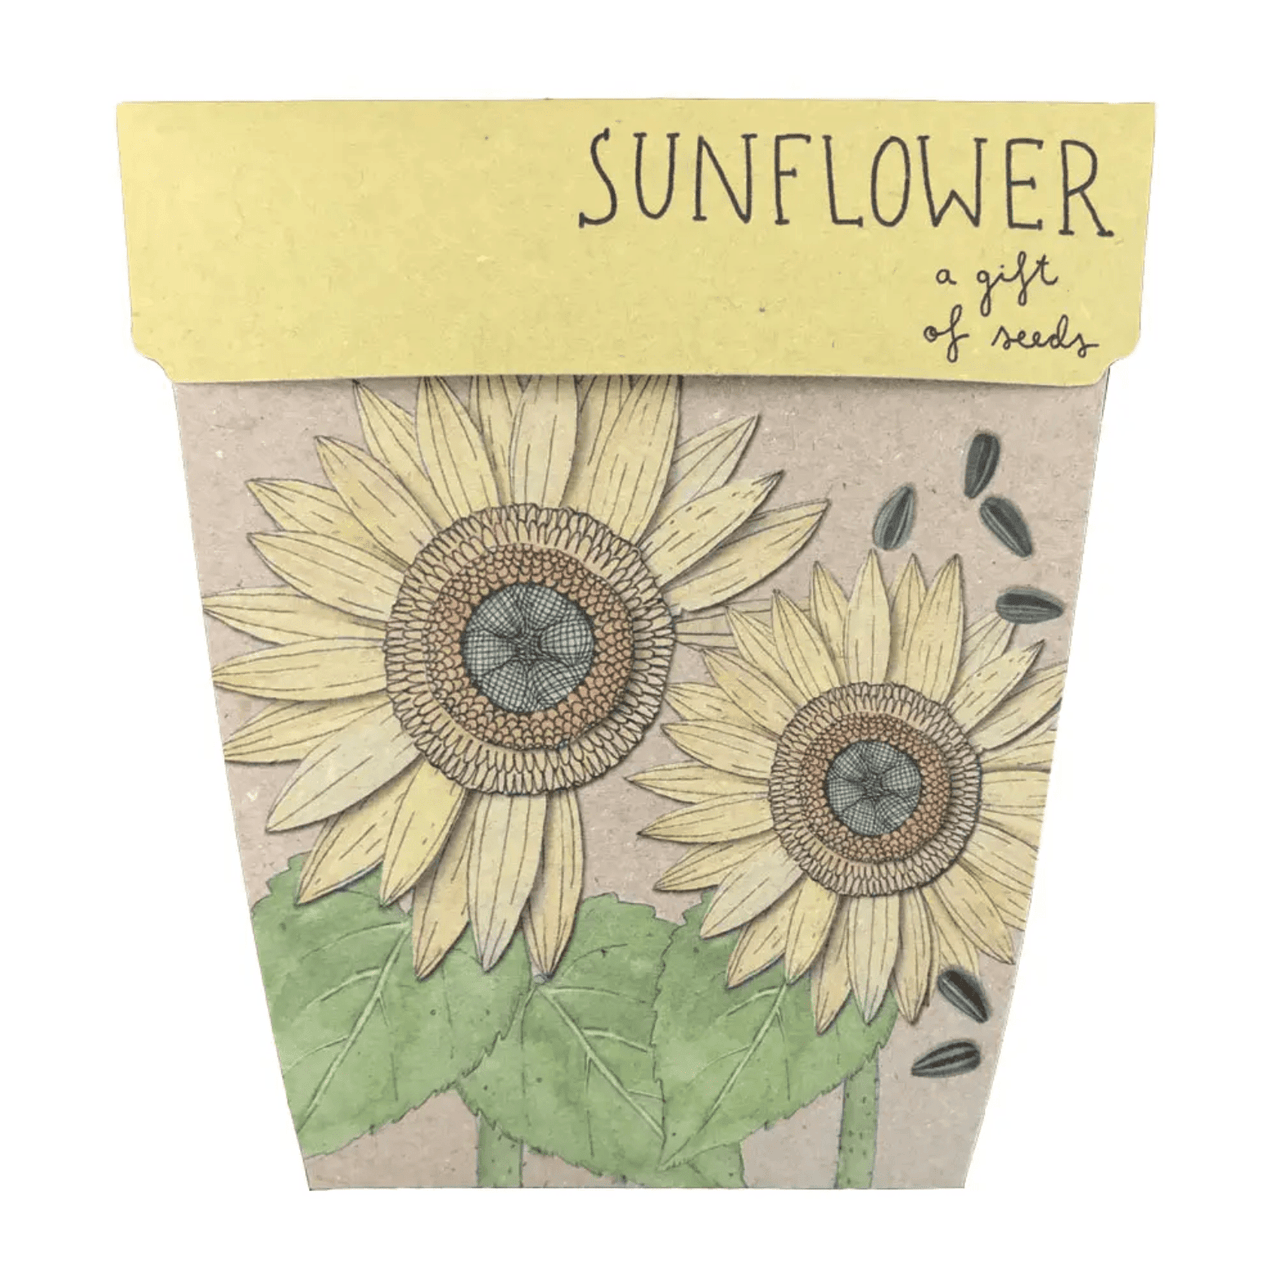 A Sow n Sow sunflower seed packet with a drawing of a sunflower.